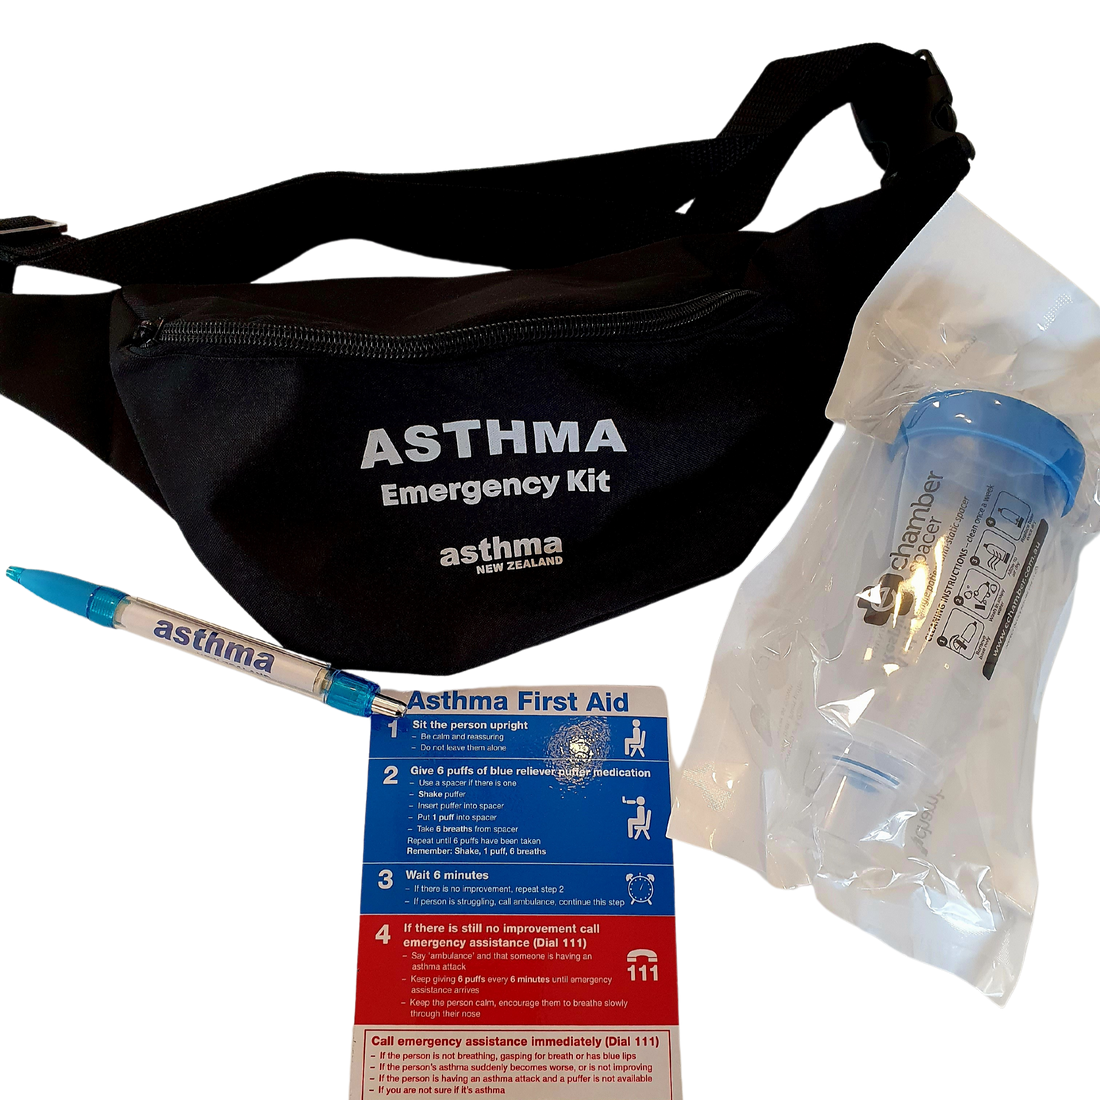 1450 New Zealand Schools Now Breathe Easier with Asthma NZ's Life-Saving Emergency Kits